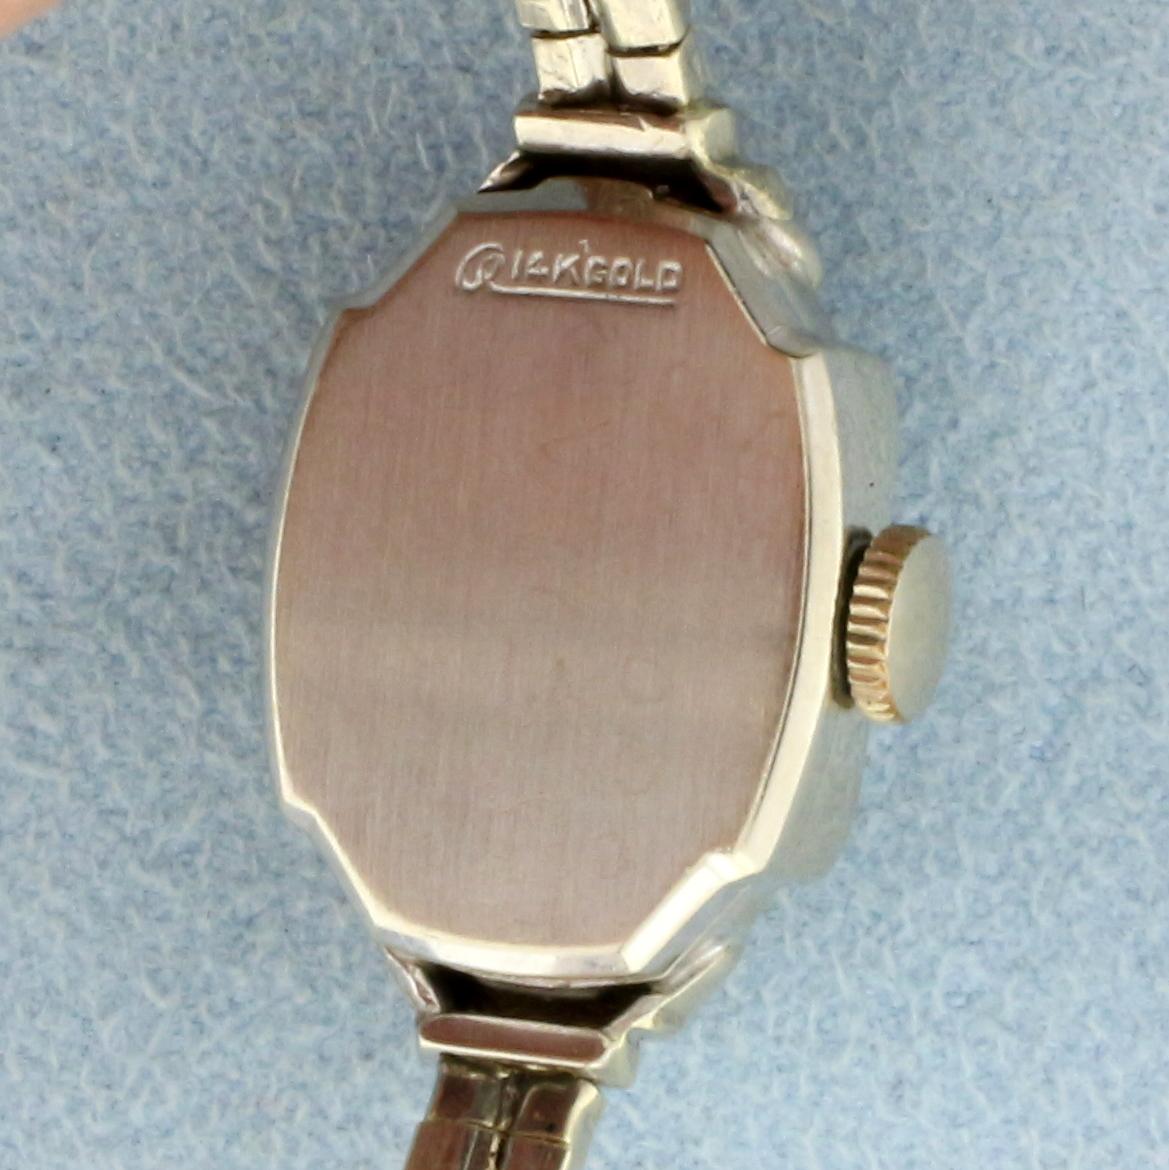 Vintage Omega Manual Wind Womens Watch In Solid 14k White Gold